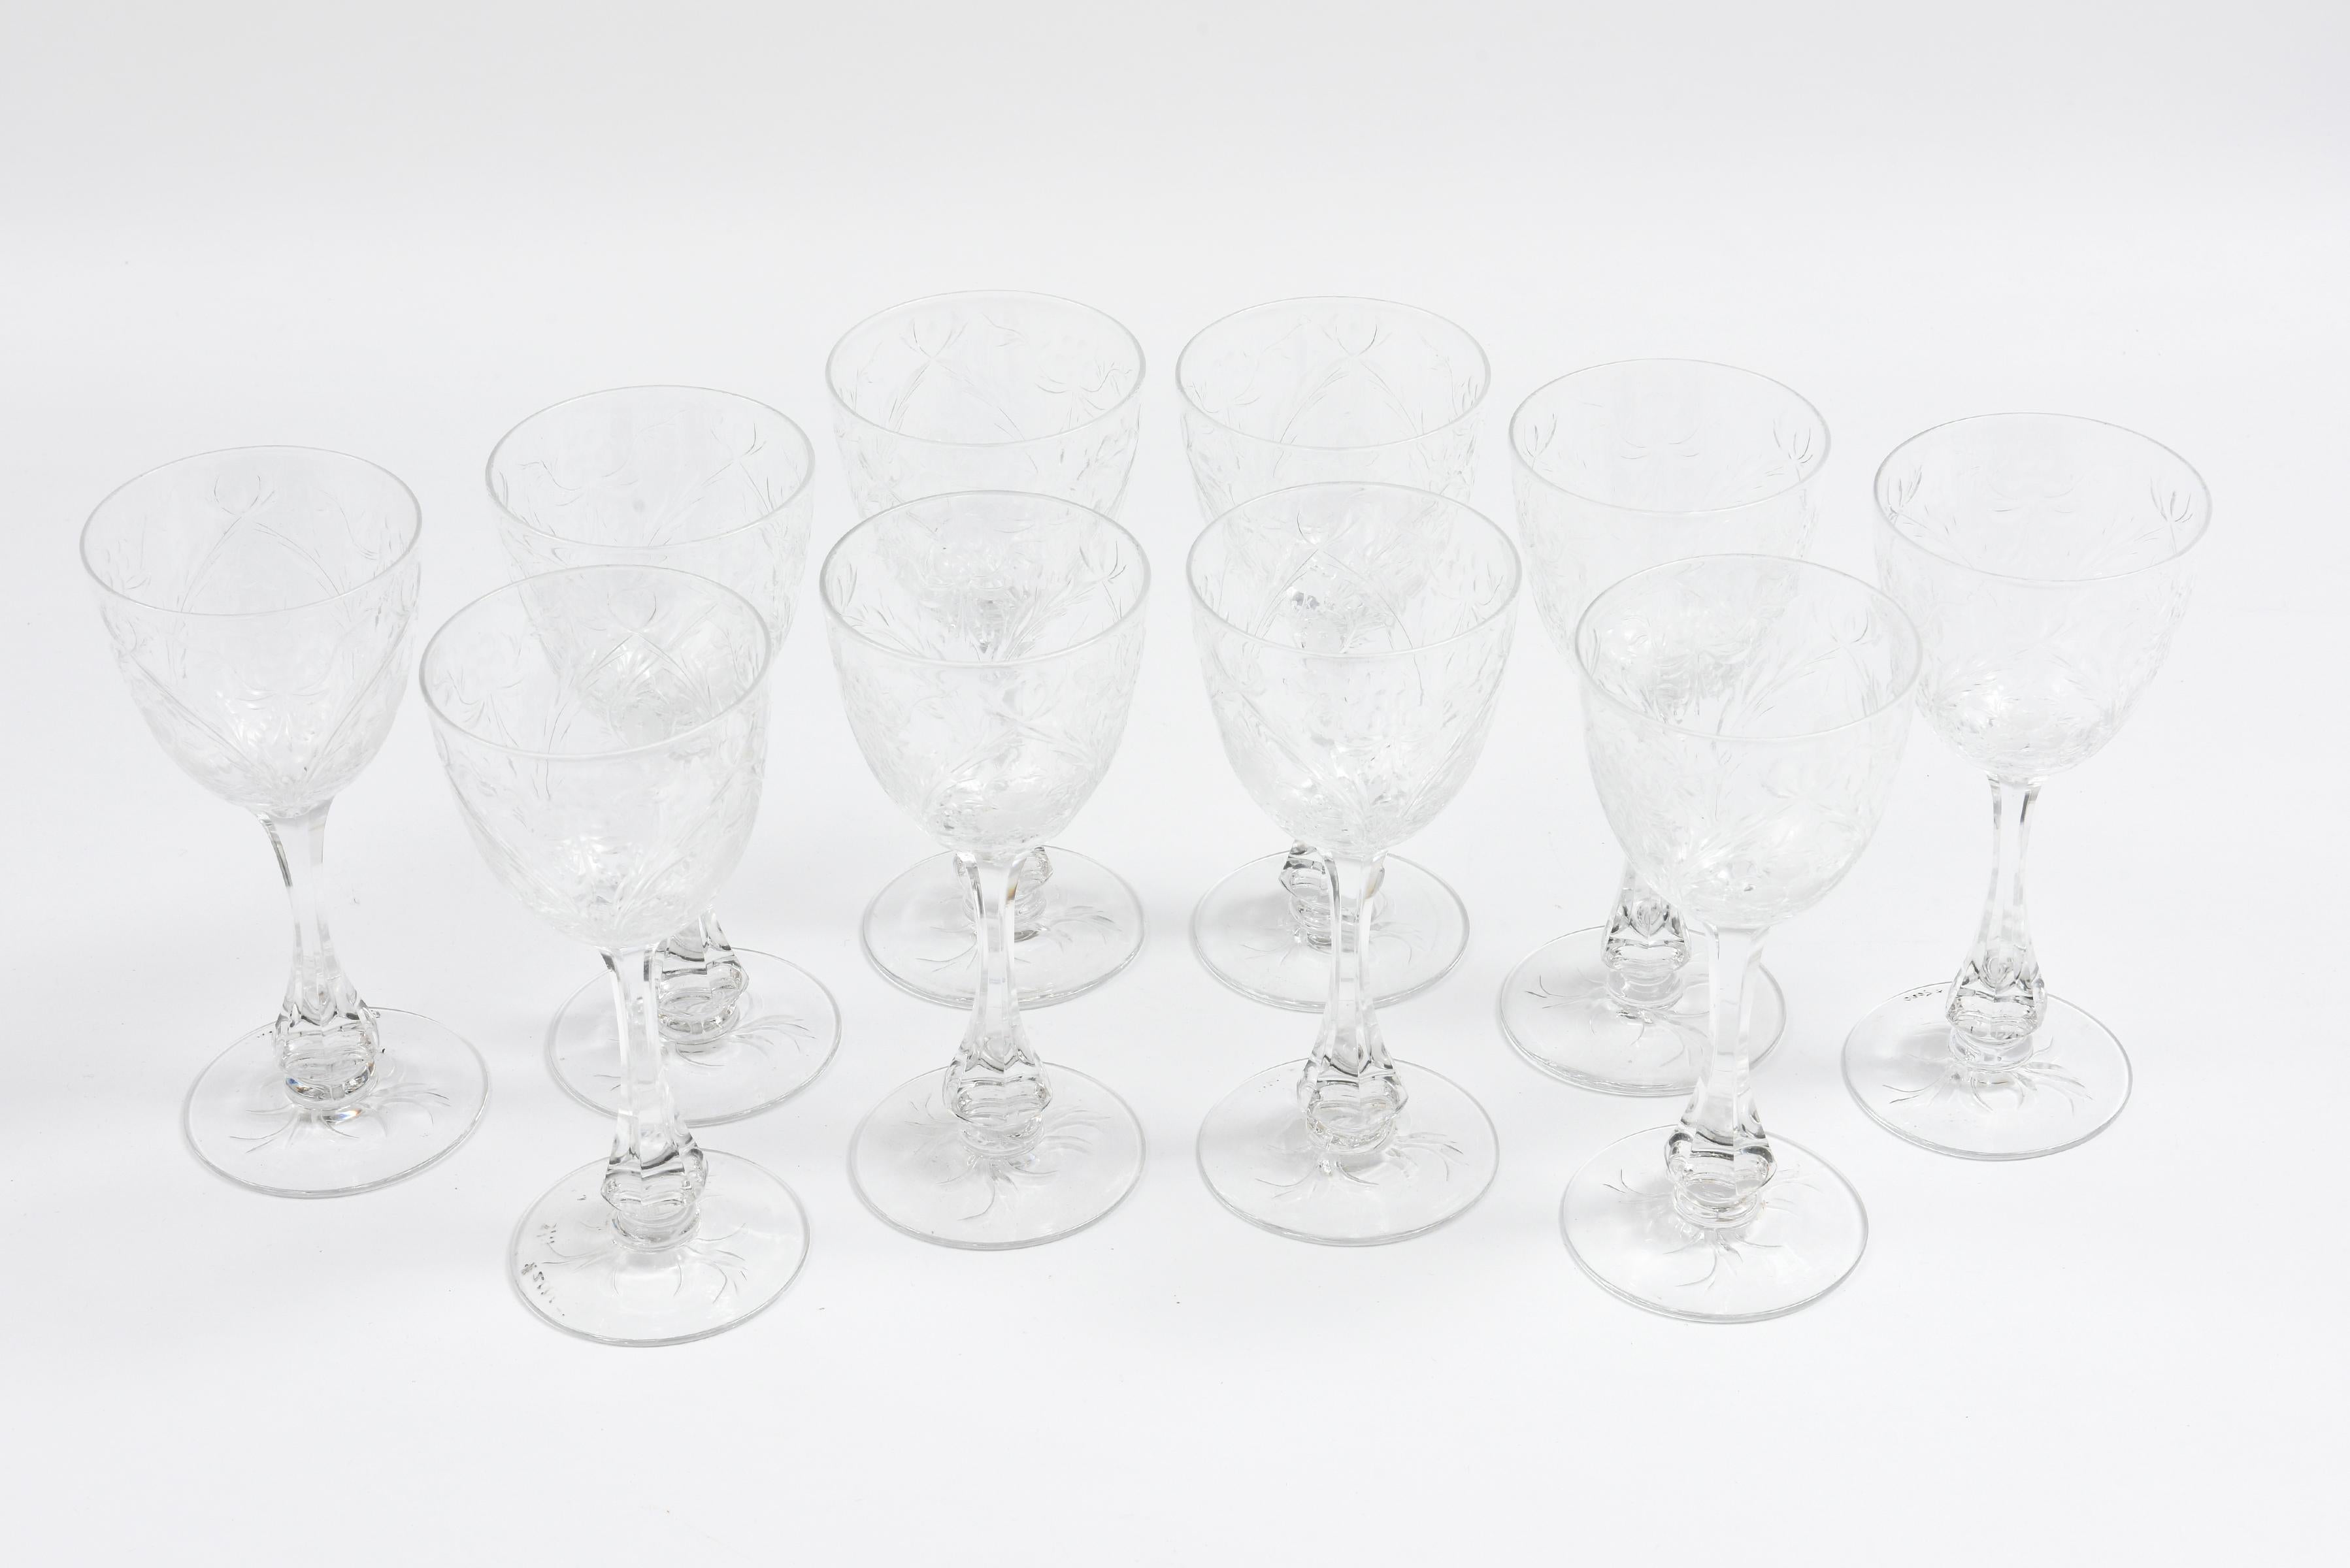 Hand-Crafted Ten Antique English Wine Glasses with Fully Cut Stem and Intaglio Floral Design